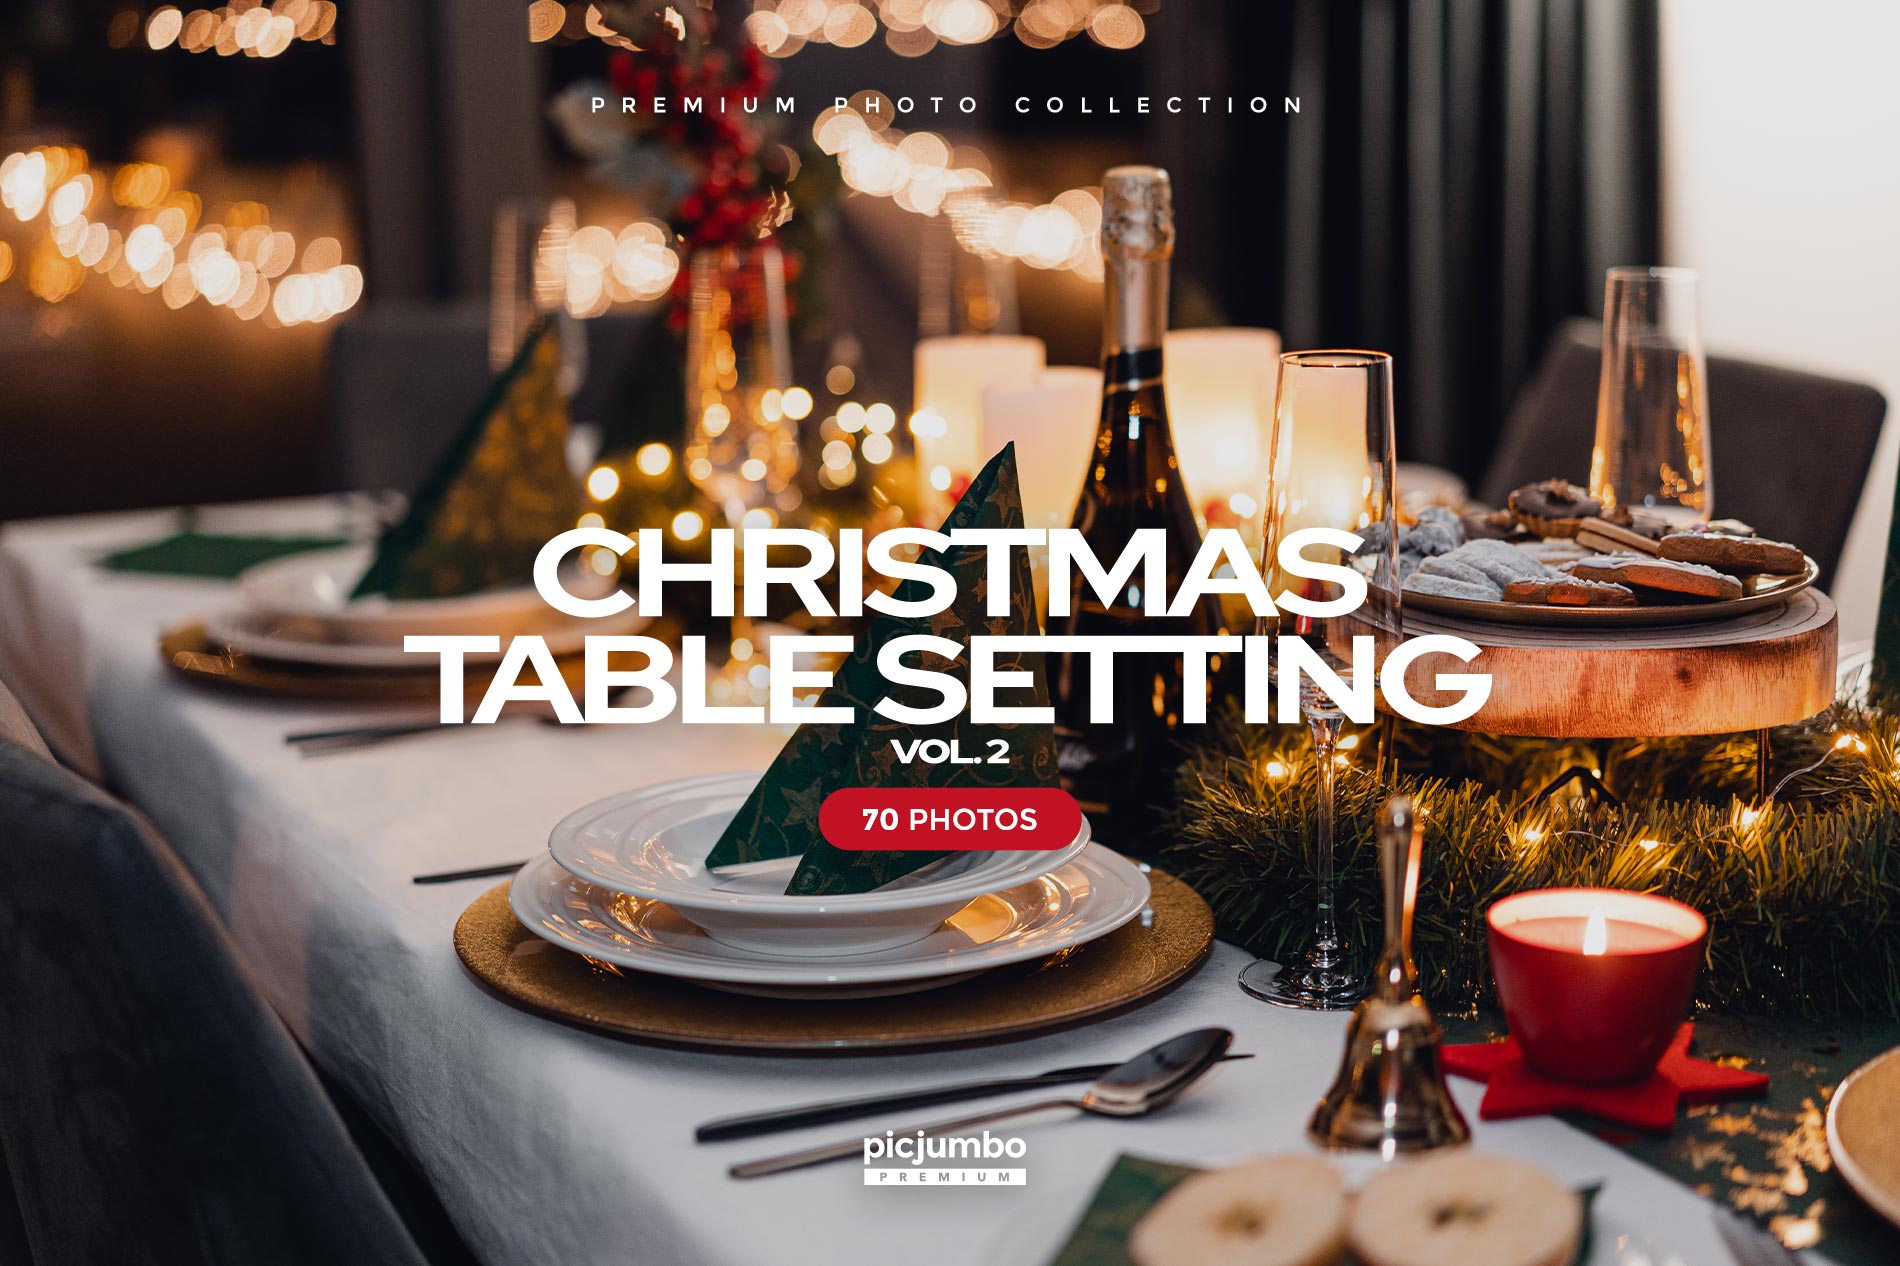 Download hi-res stock photos from our Christmas Table Setting Vol. 2 PREMIUM Collection!